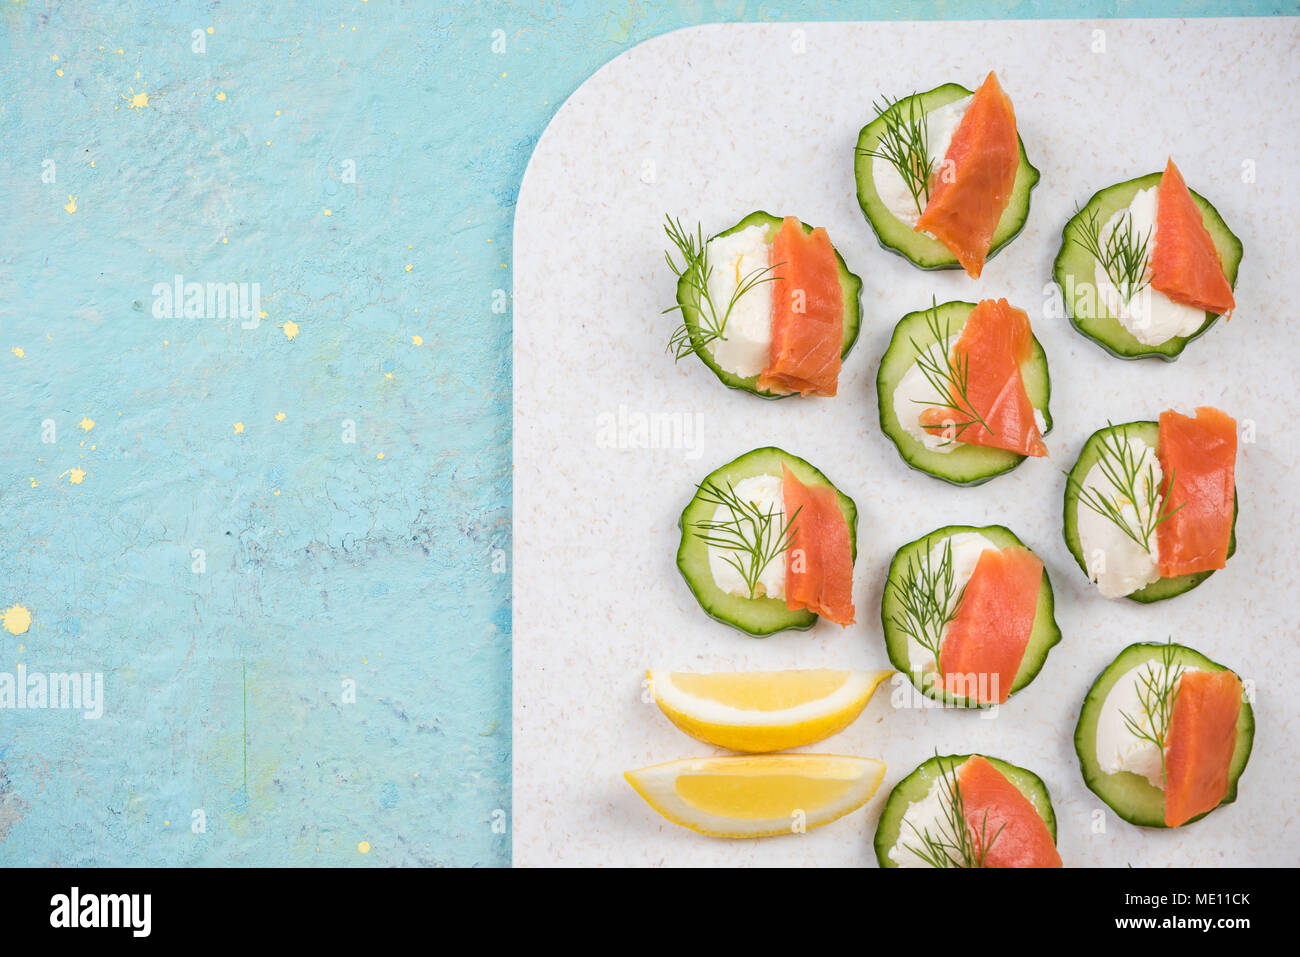 Colorful healthy canapee snack with cucumber. Stock Photo